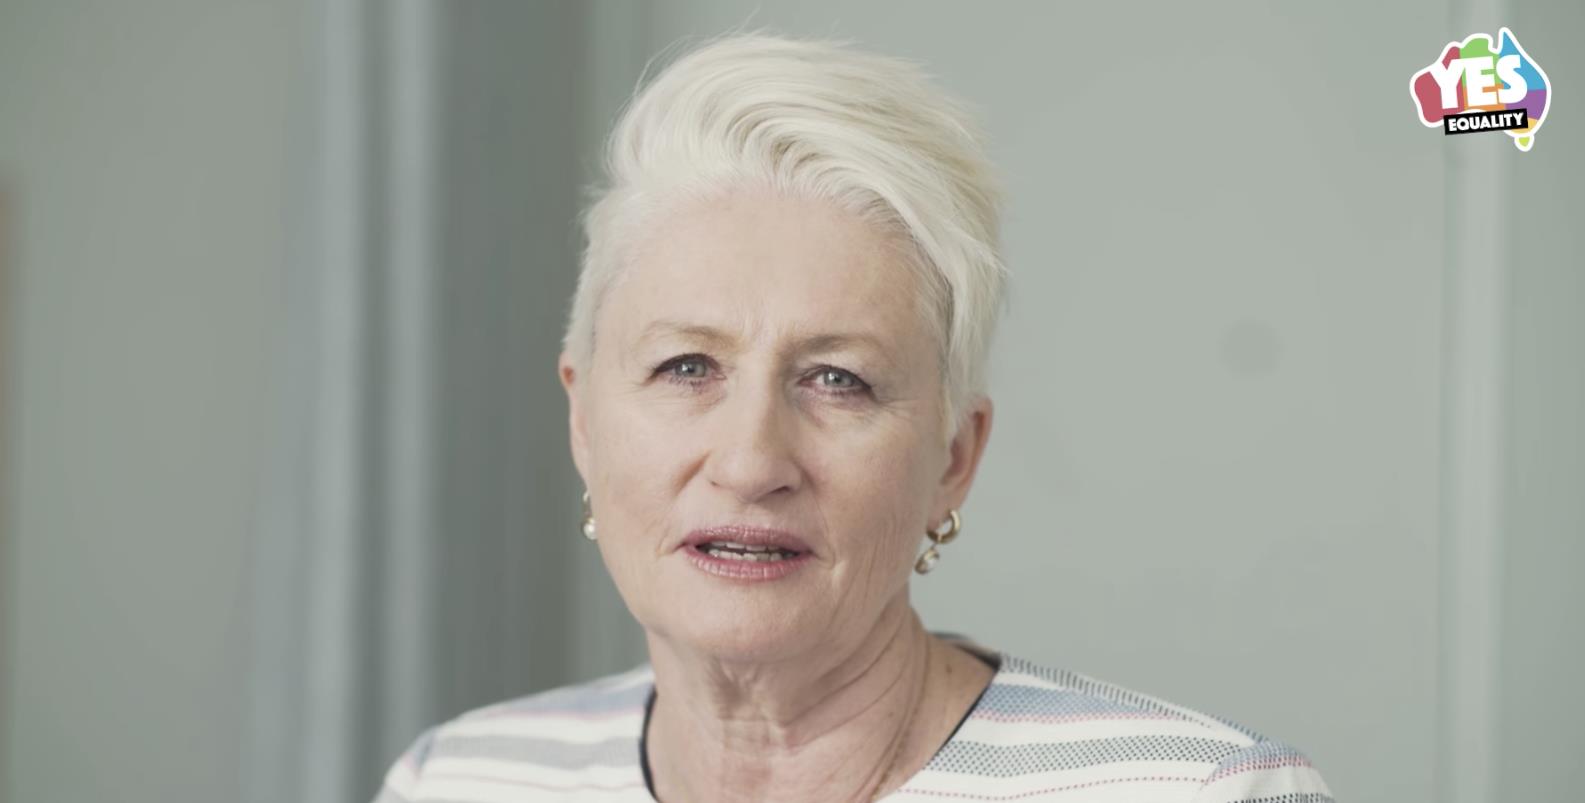 Marriage equality campaigner Kerryn Phelps to run for Wentworth as an independent